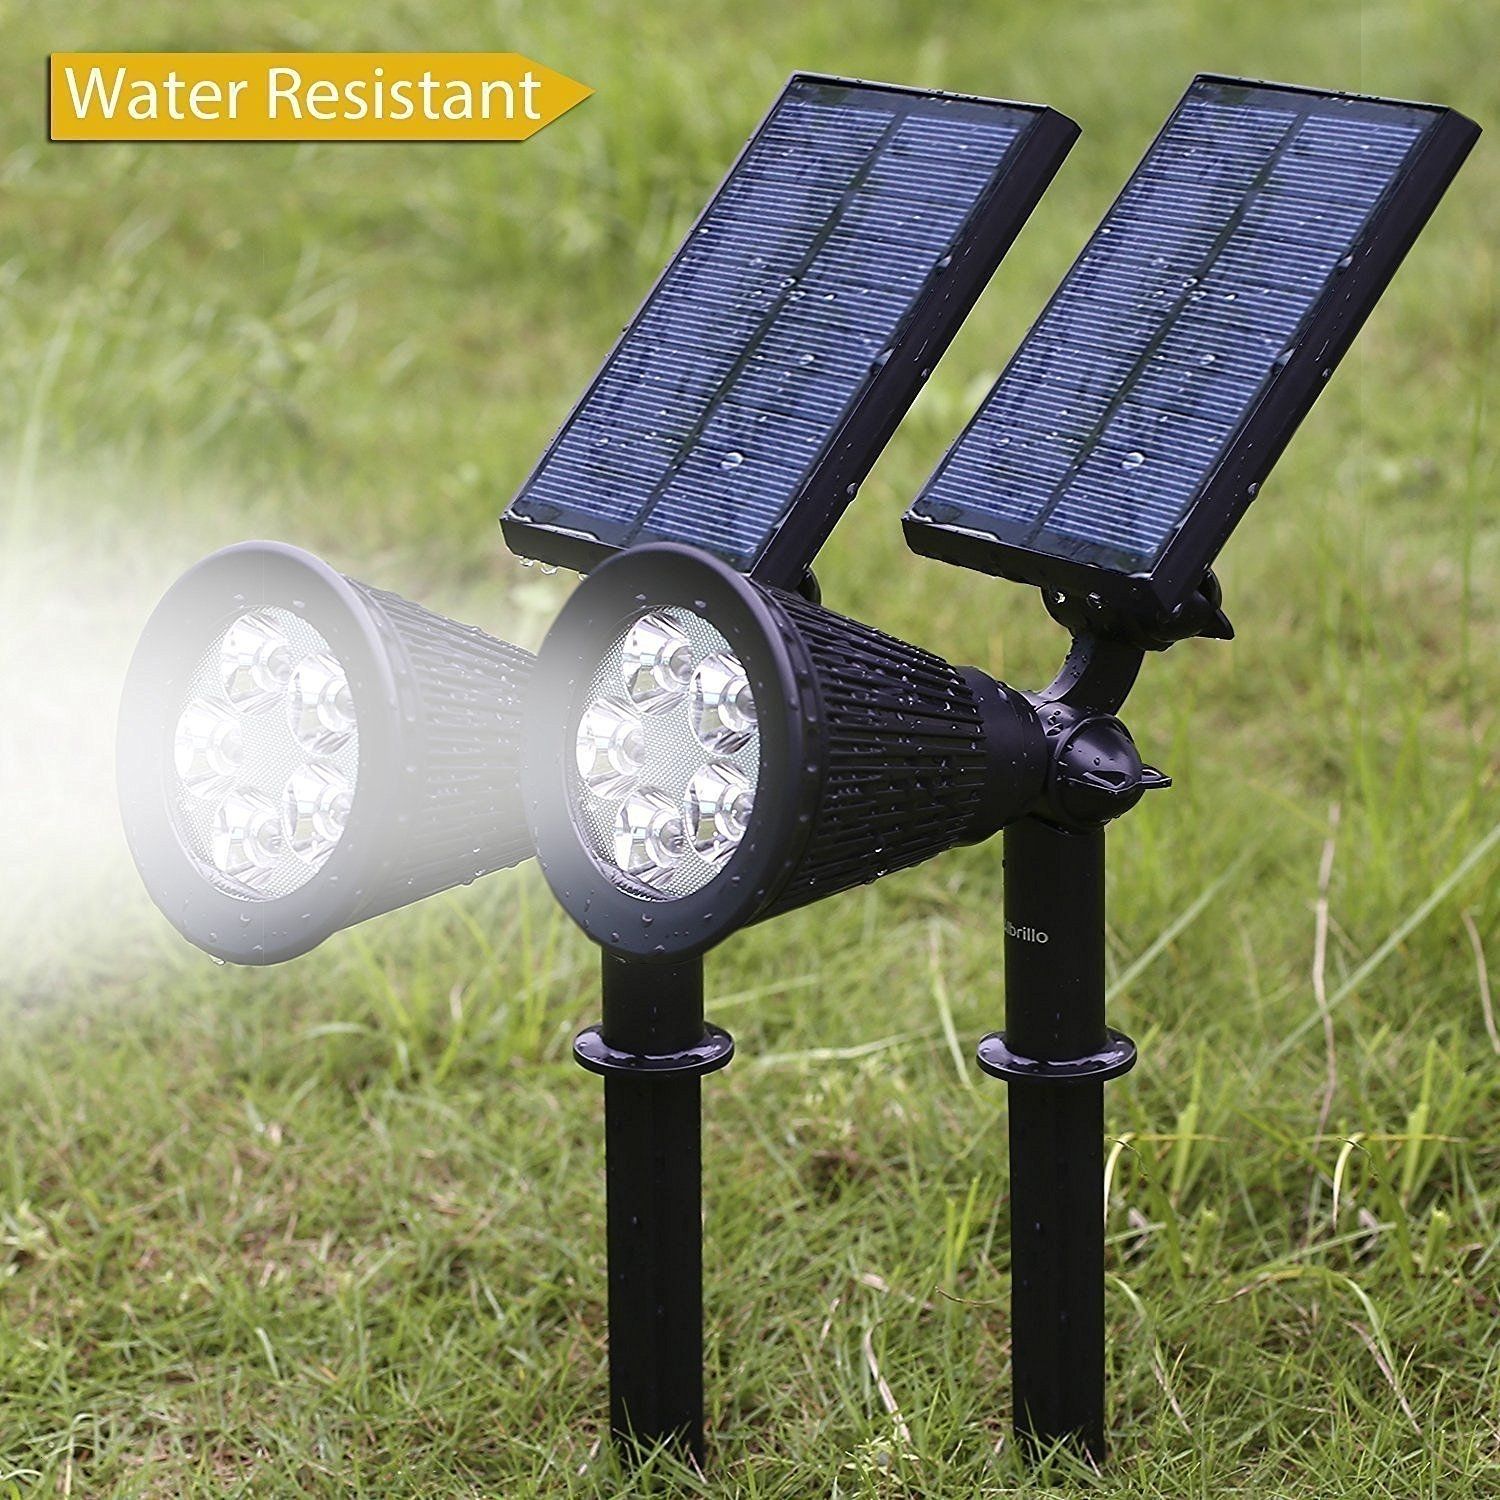 Outdoor Lights Amazon Best Of Albrillo 5 Led Solar Powered Spotlight Pertaining To Outdoor Lanterns At Amazon (View 16 of 20)